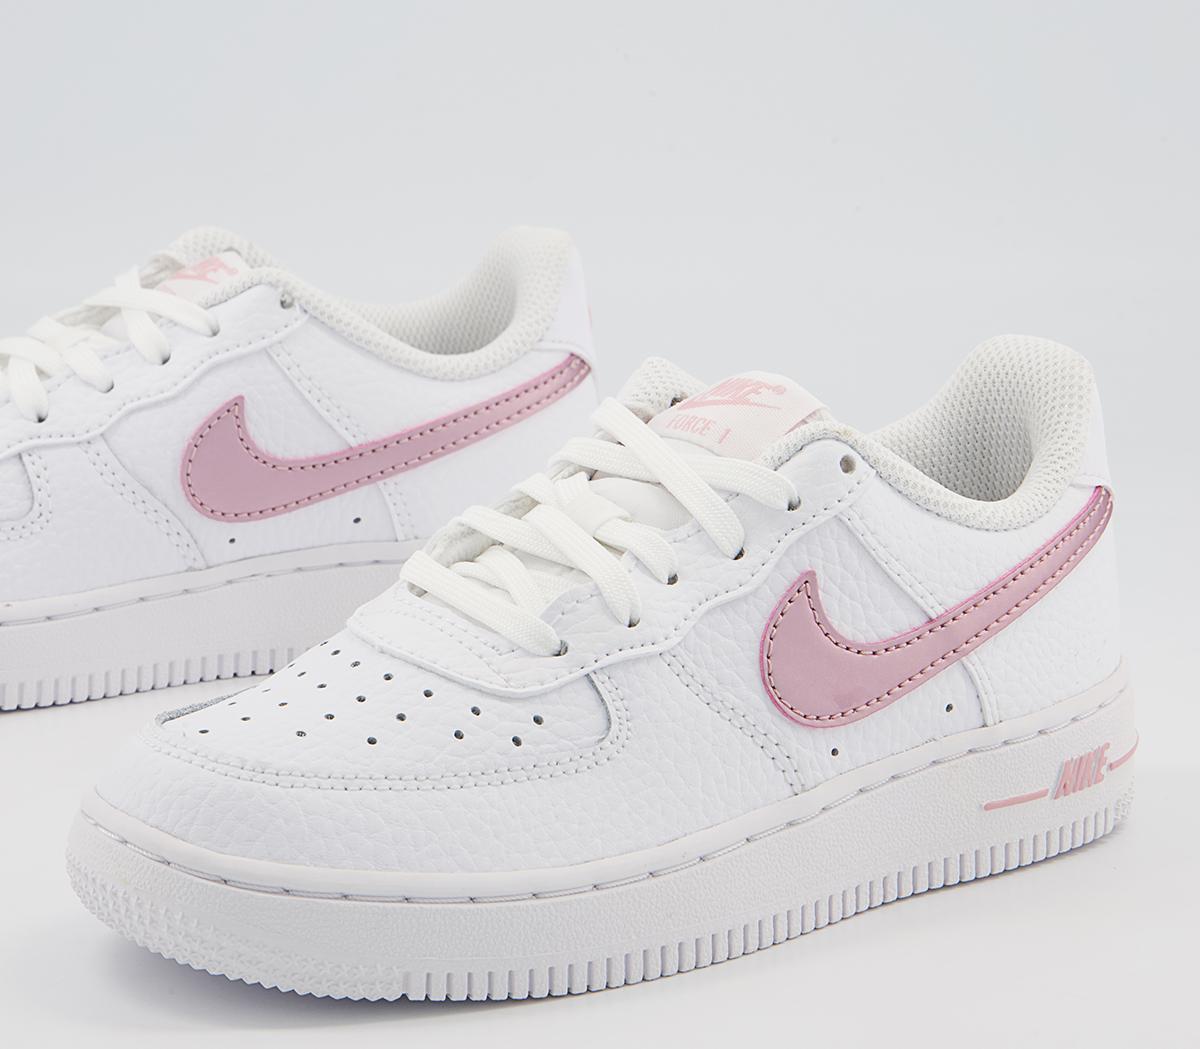 Nike Air Force 1 Ps Trainers White Pink Glaze - Unisex